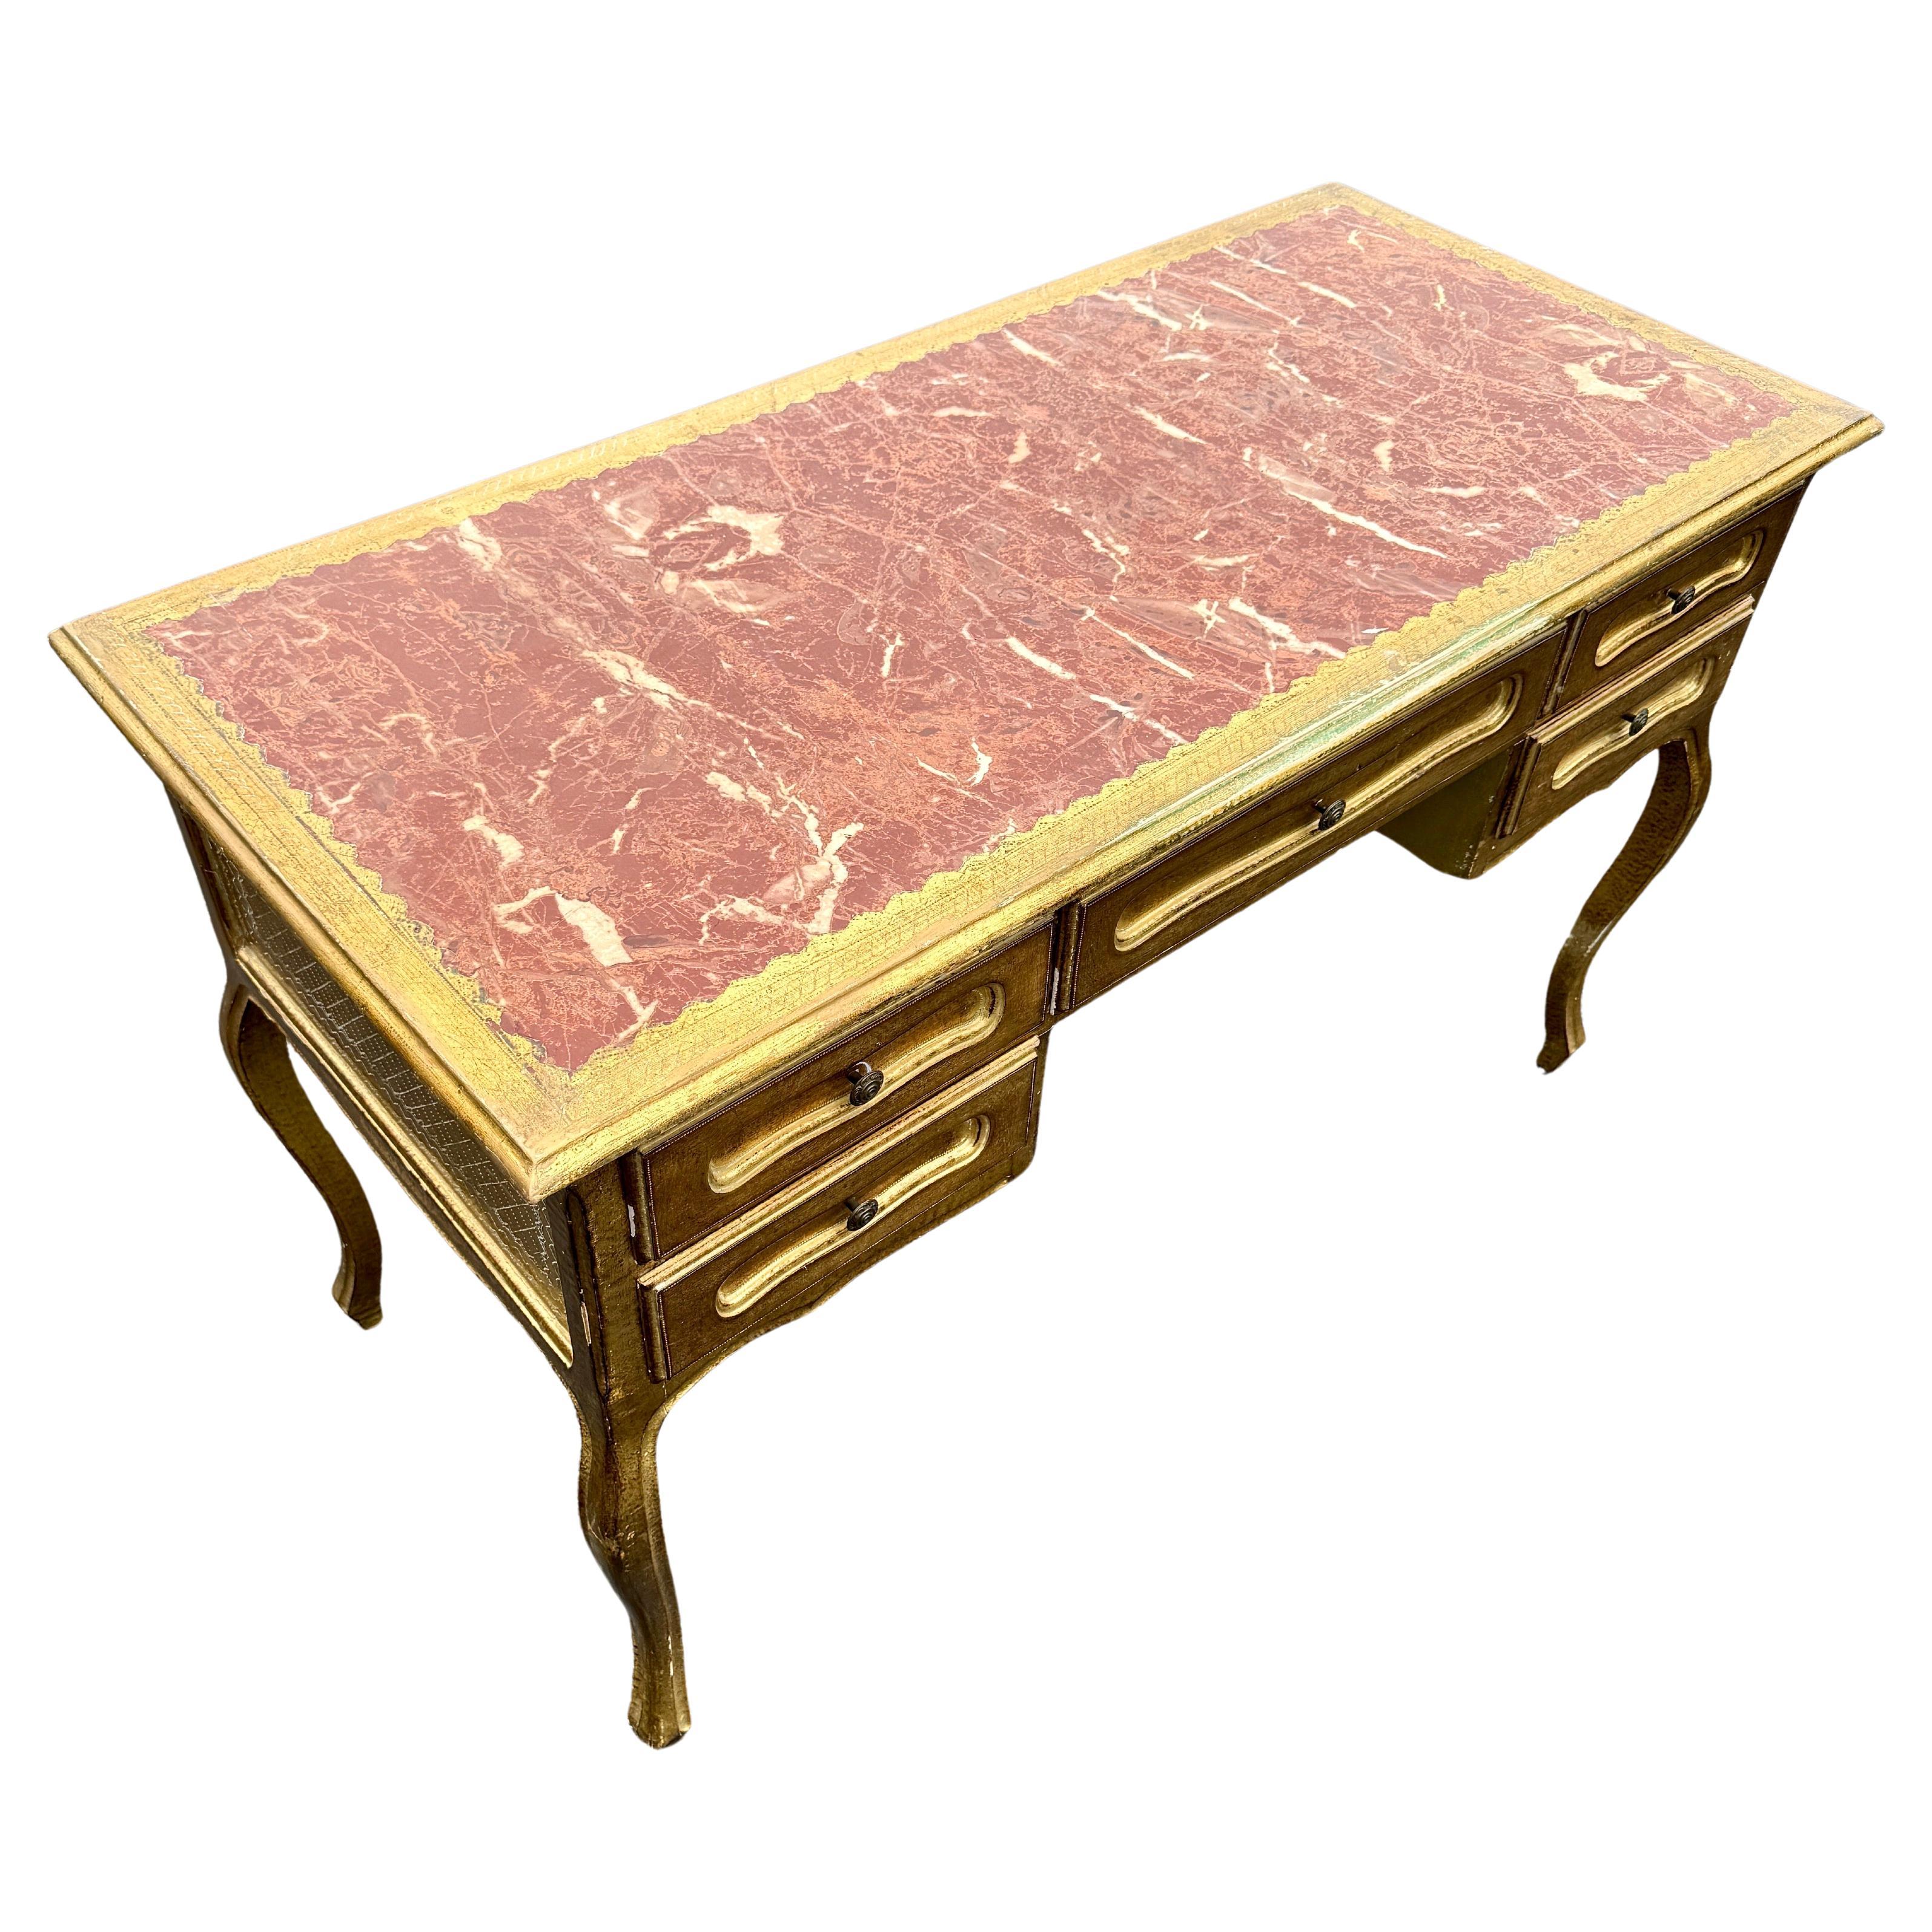 Florentine Writing Desk with 5 Drawers in Giltwood, Italy 1960's

This vintage wooden desk is remarkable with all its detailing including the writing surface featuring a leather faux marble top and cabriole legs. There is quite a bit of storage with